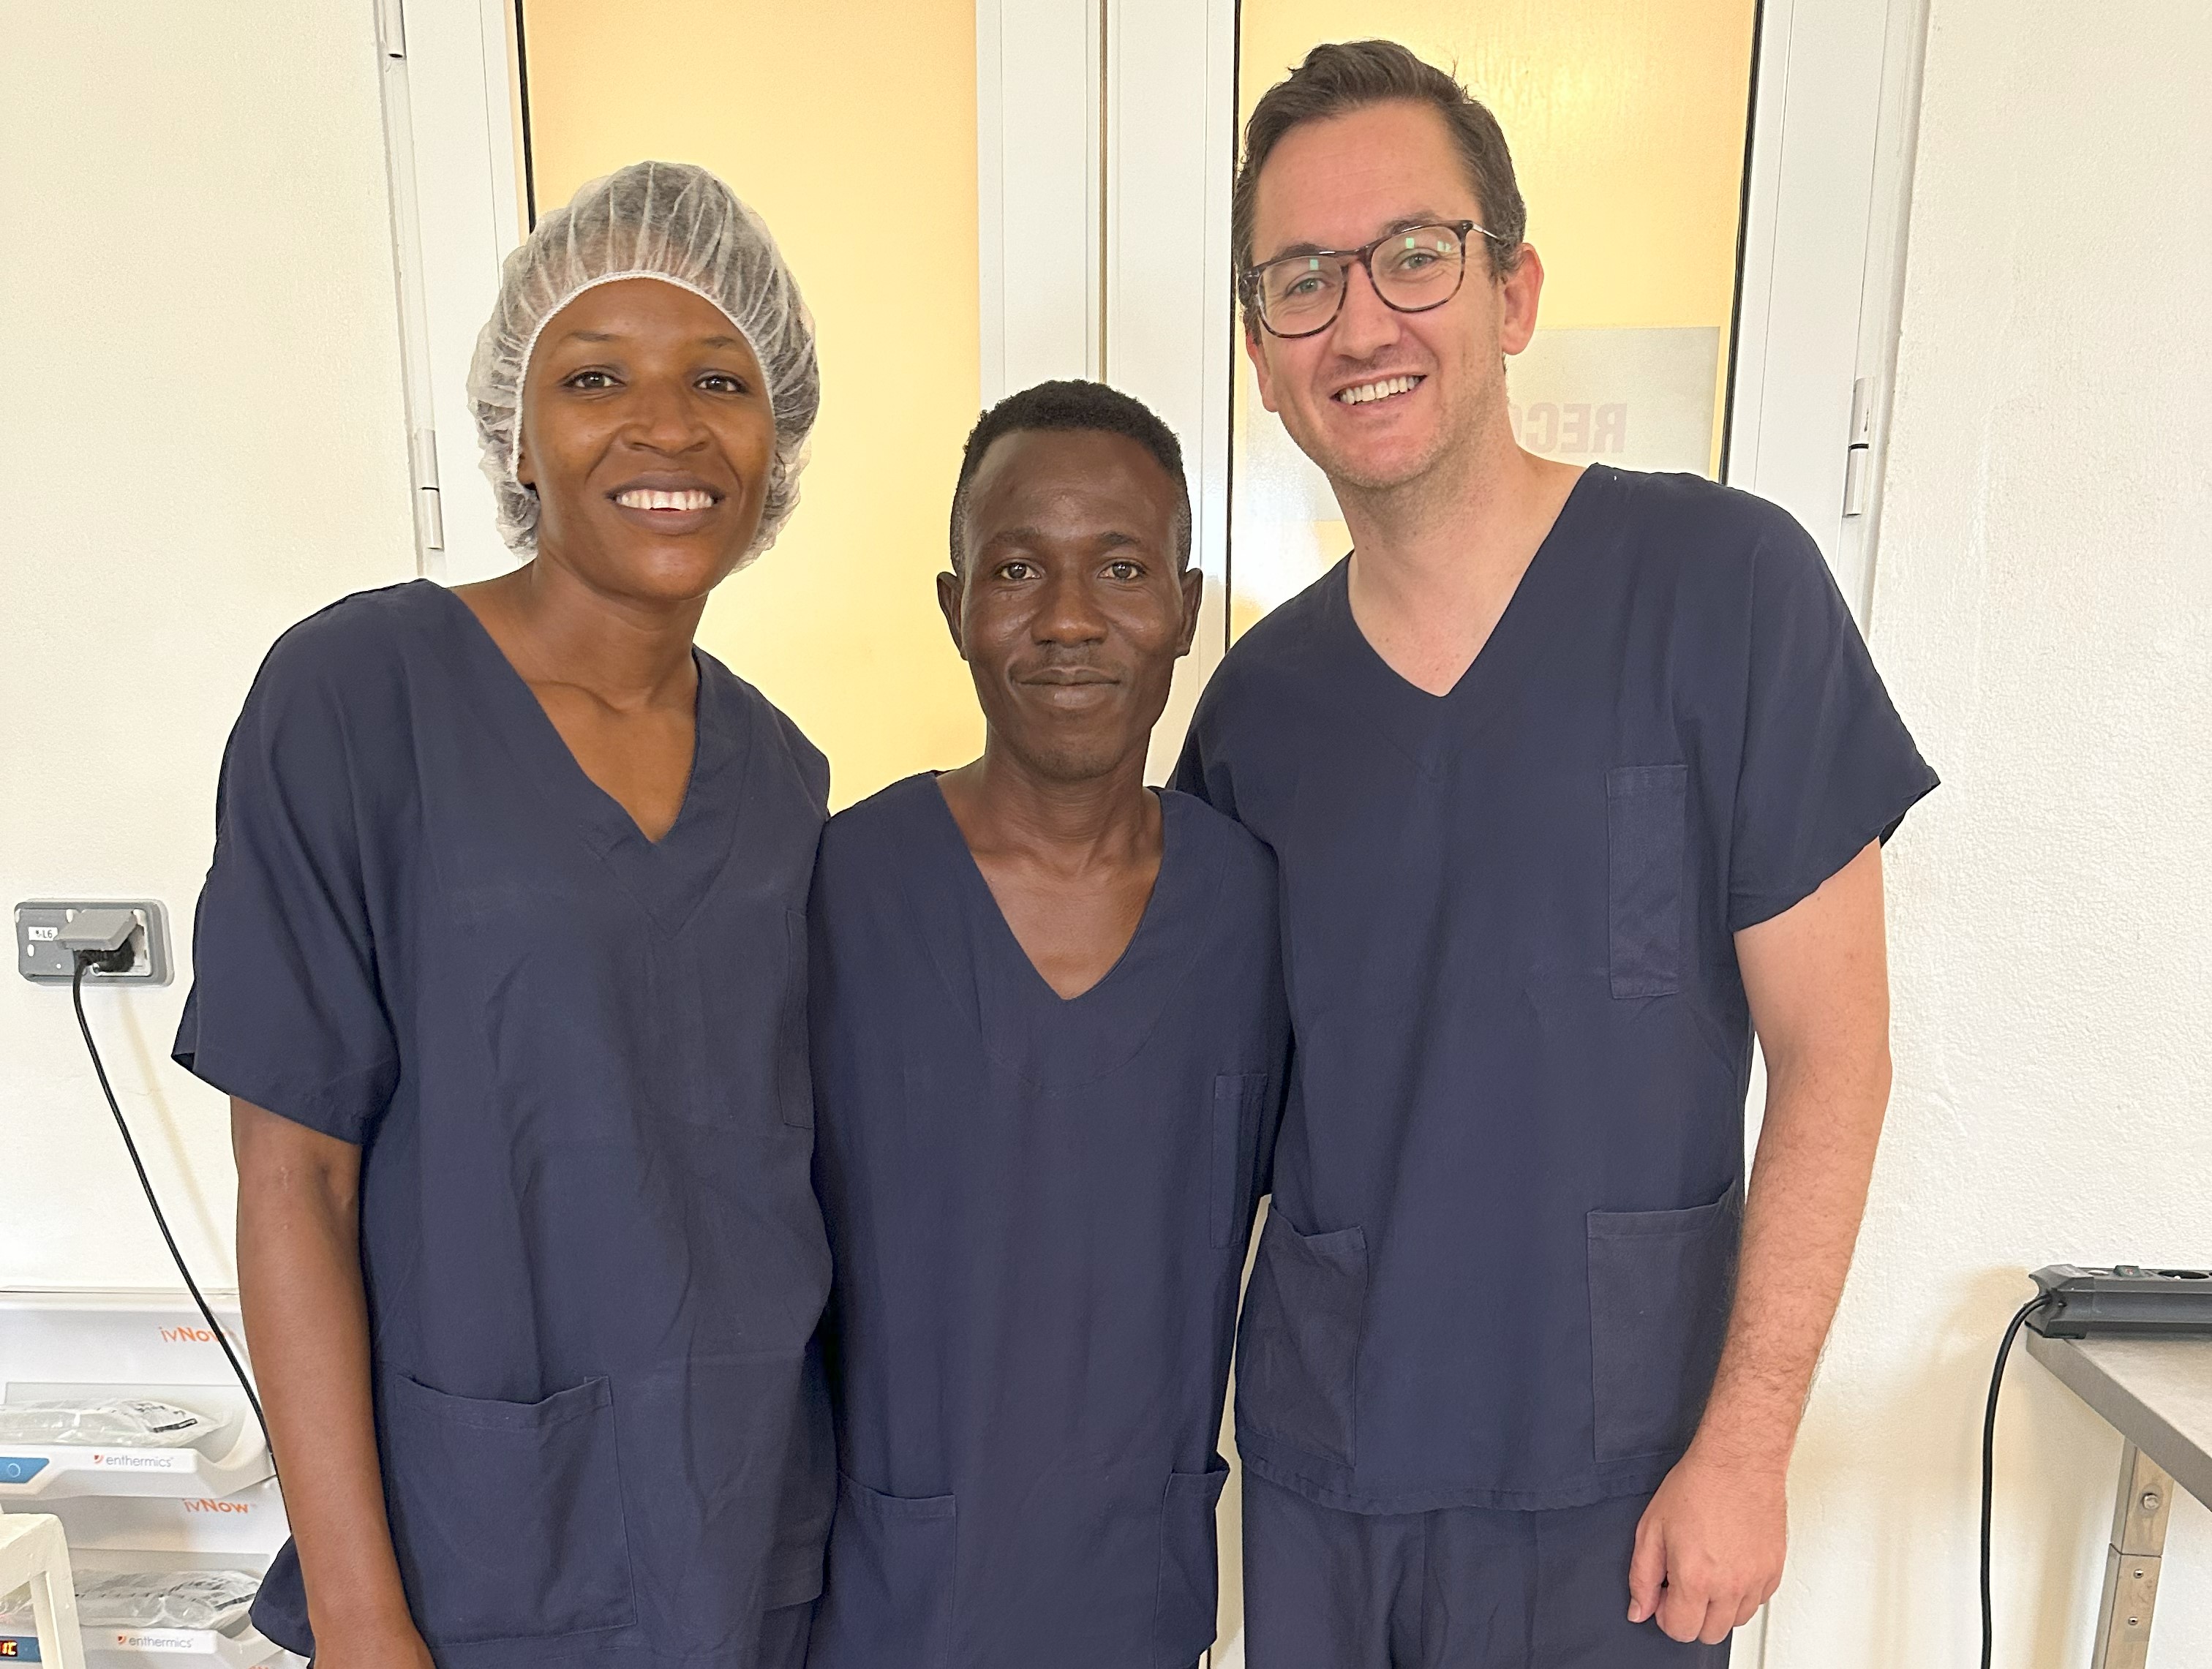 Obstetrician-gynaecologist Jared Watts with colleagues on assignment.